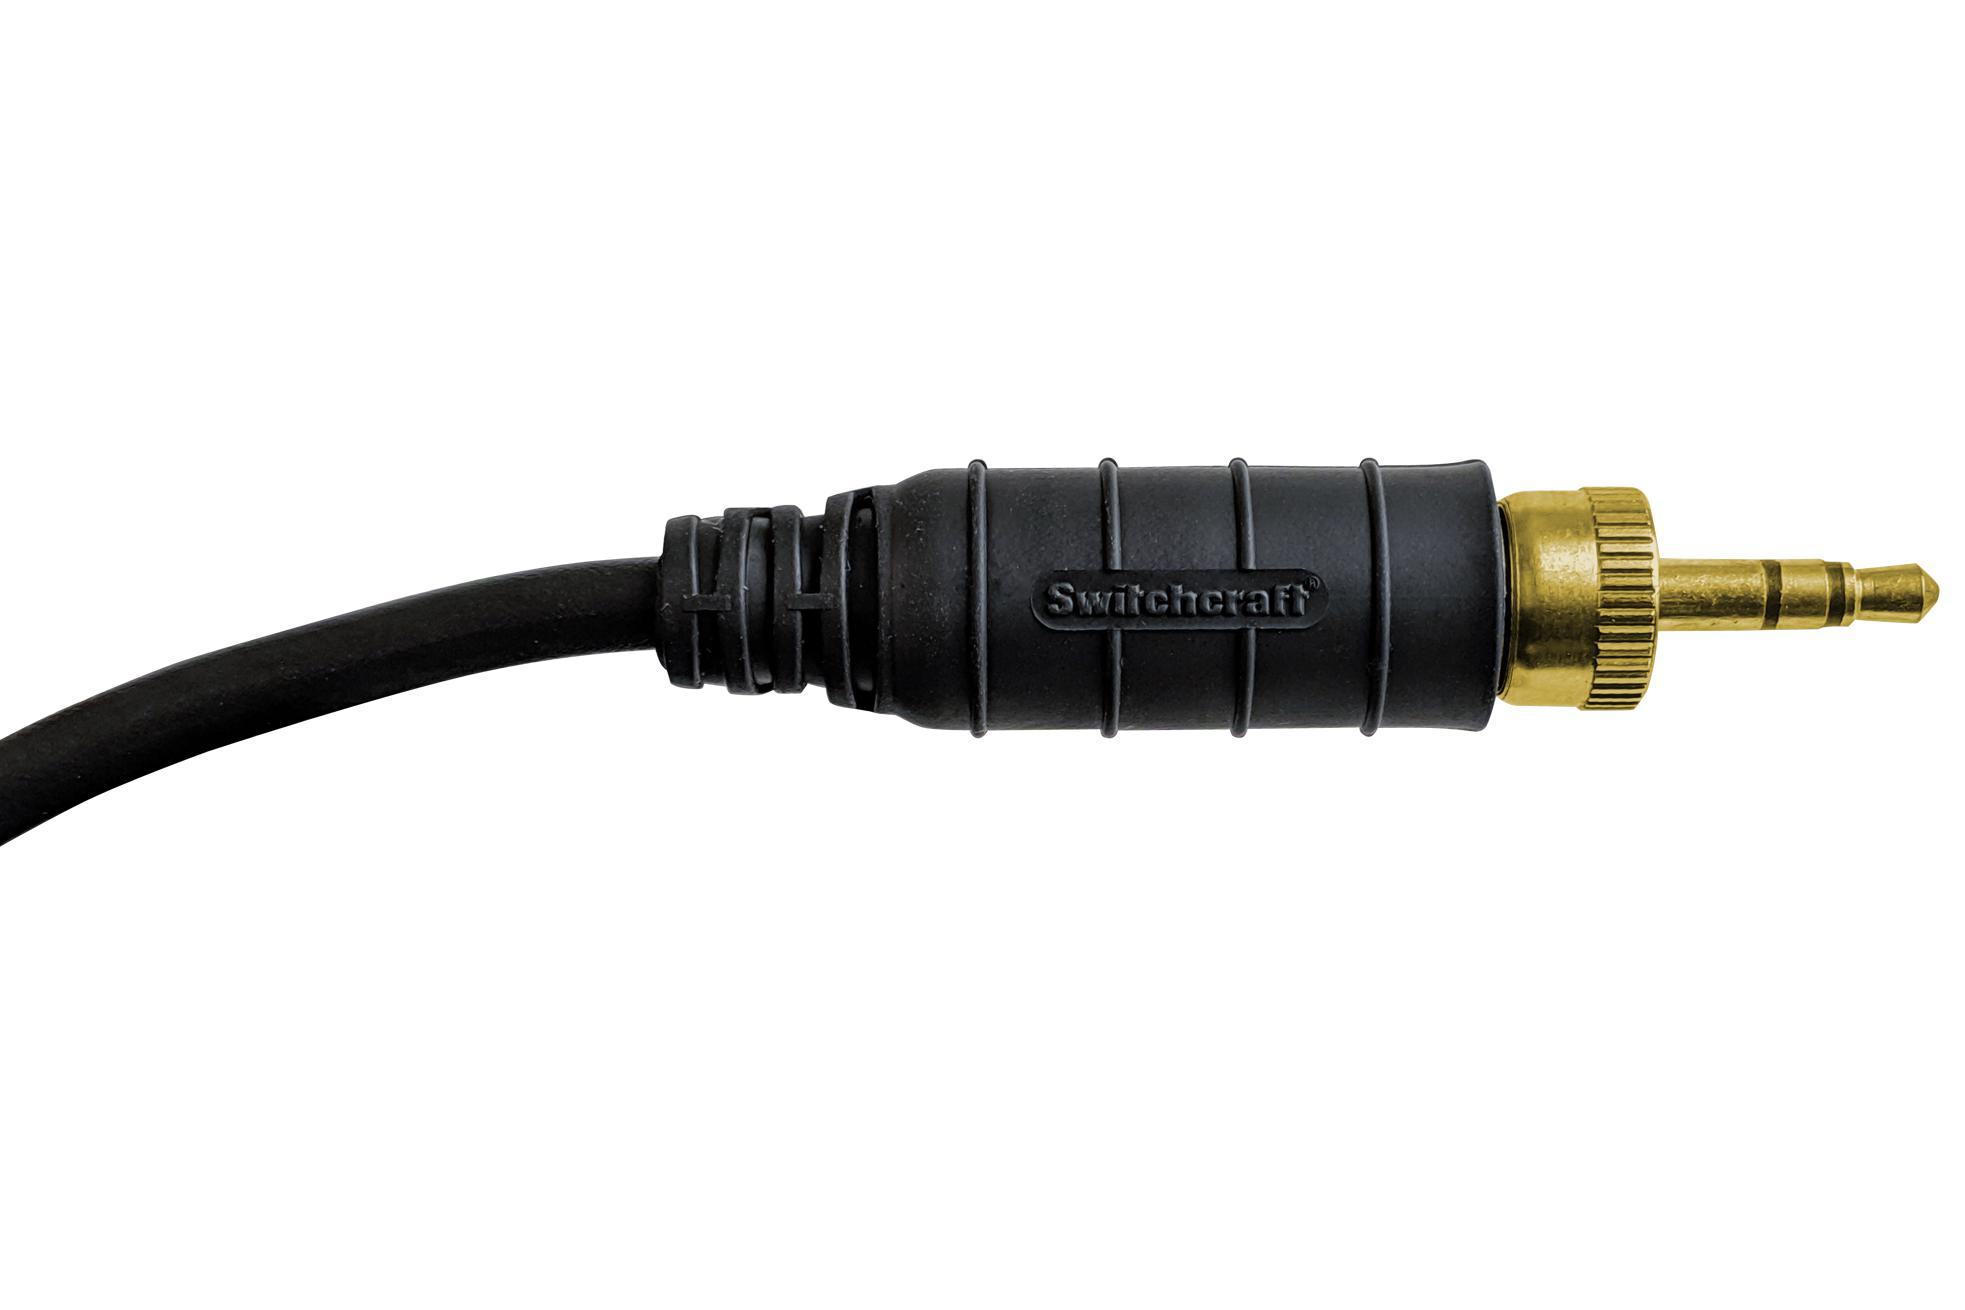 Switchcraft/conxall 35Hdlsau12 3.5mm Lck Sld Stereo Plug .12 Gold, Rohs